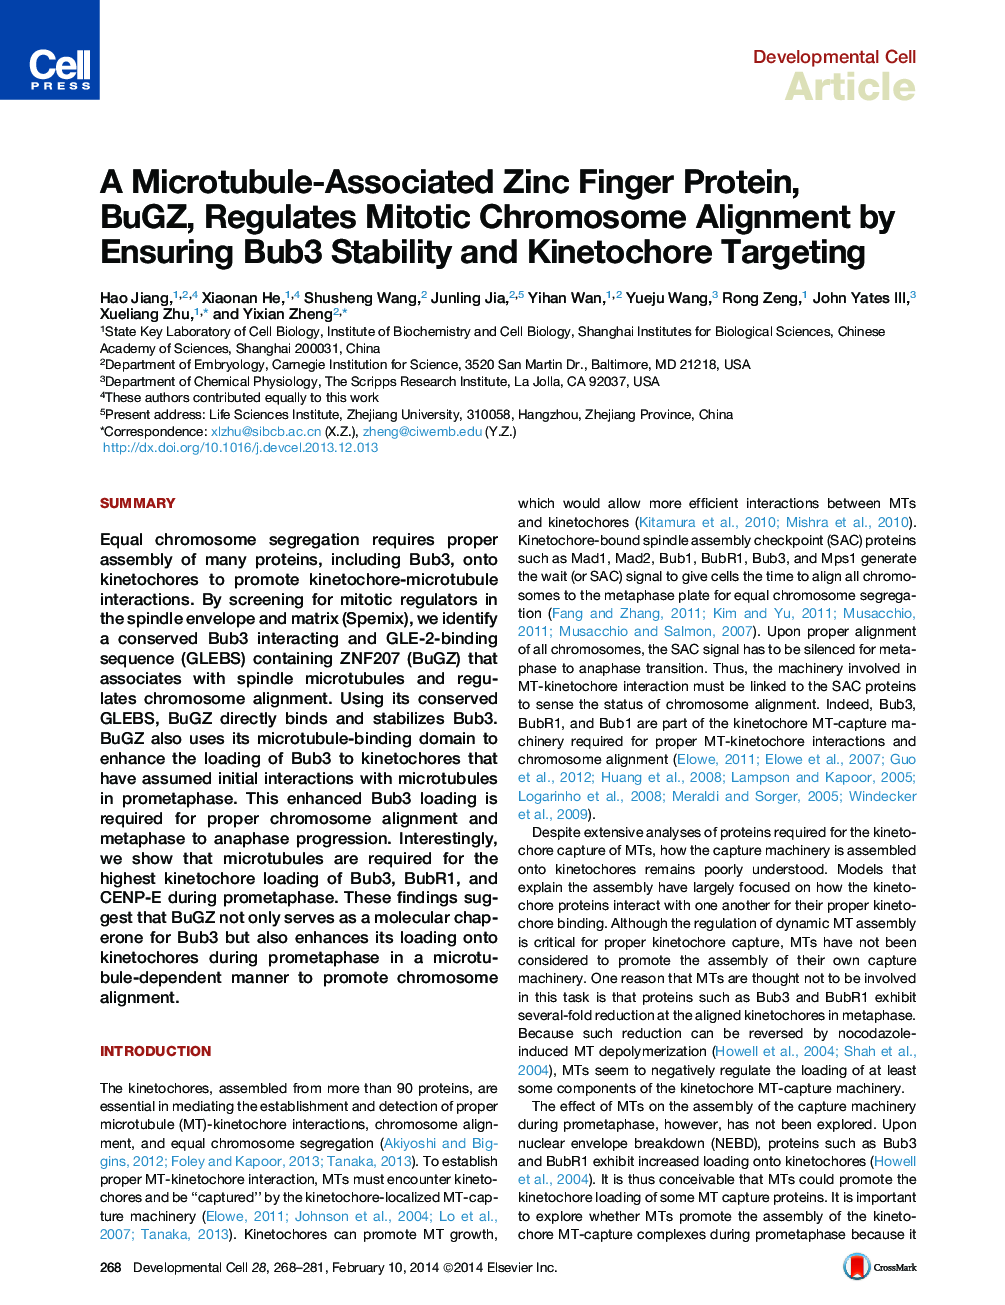 A Microtubule-Associated Zinc Finger Protein, BuGZ, Regulates Mitotic Chromosome Alignment by Ensuring Bub3 Stability and Kinetochore Targeting